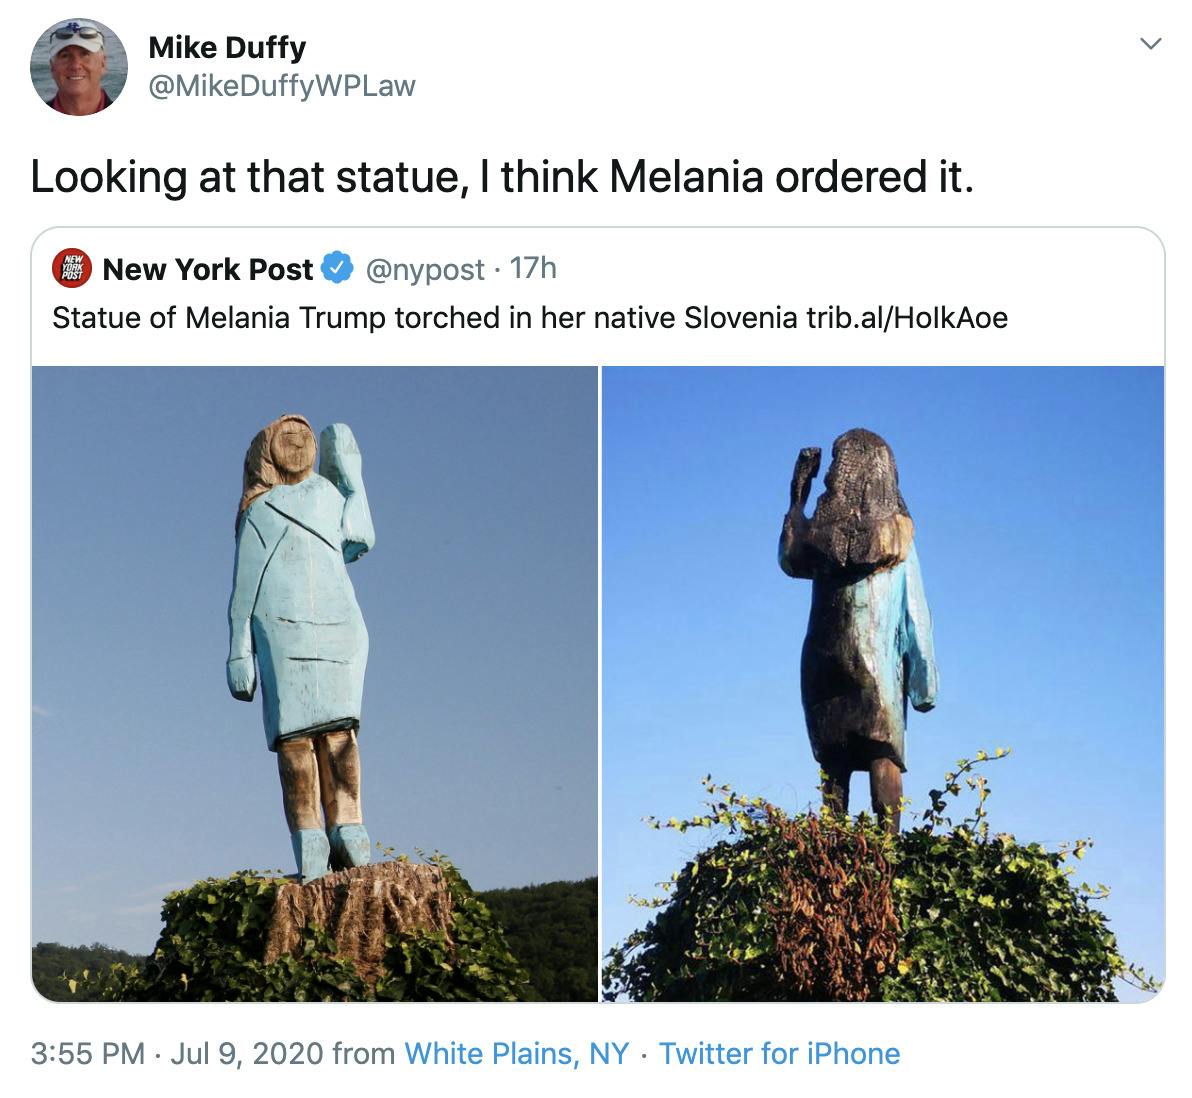 "Looking at that statue, I think Melania ordered it." over before and after pics